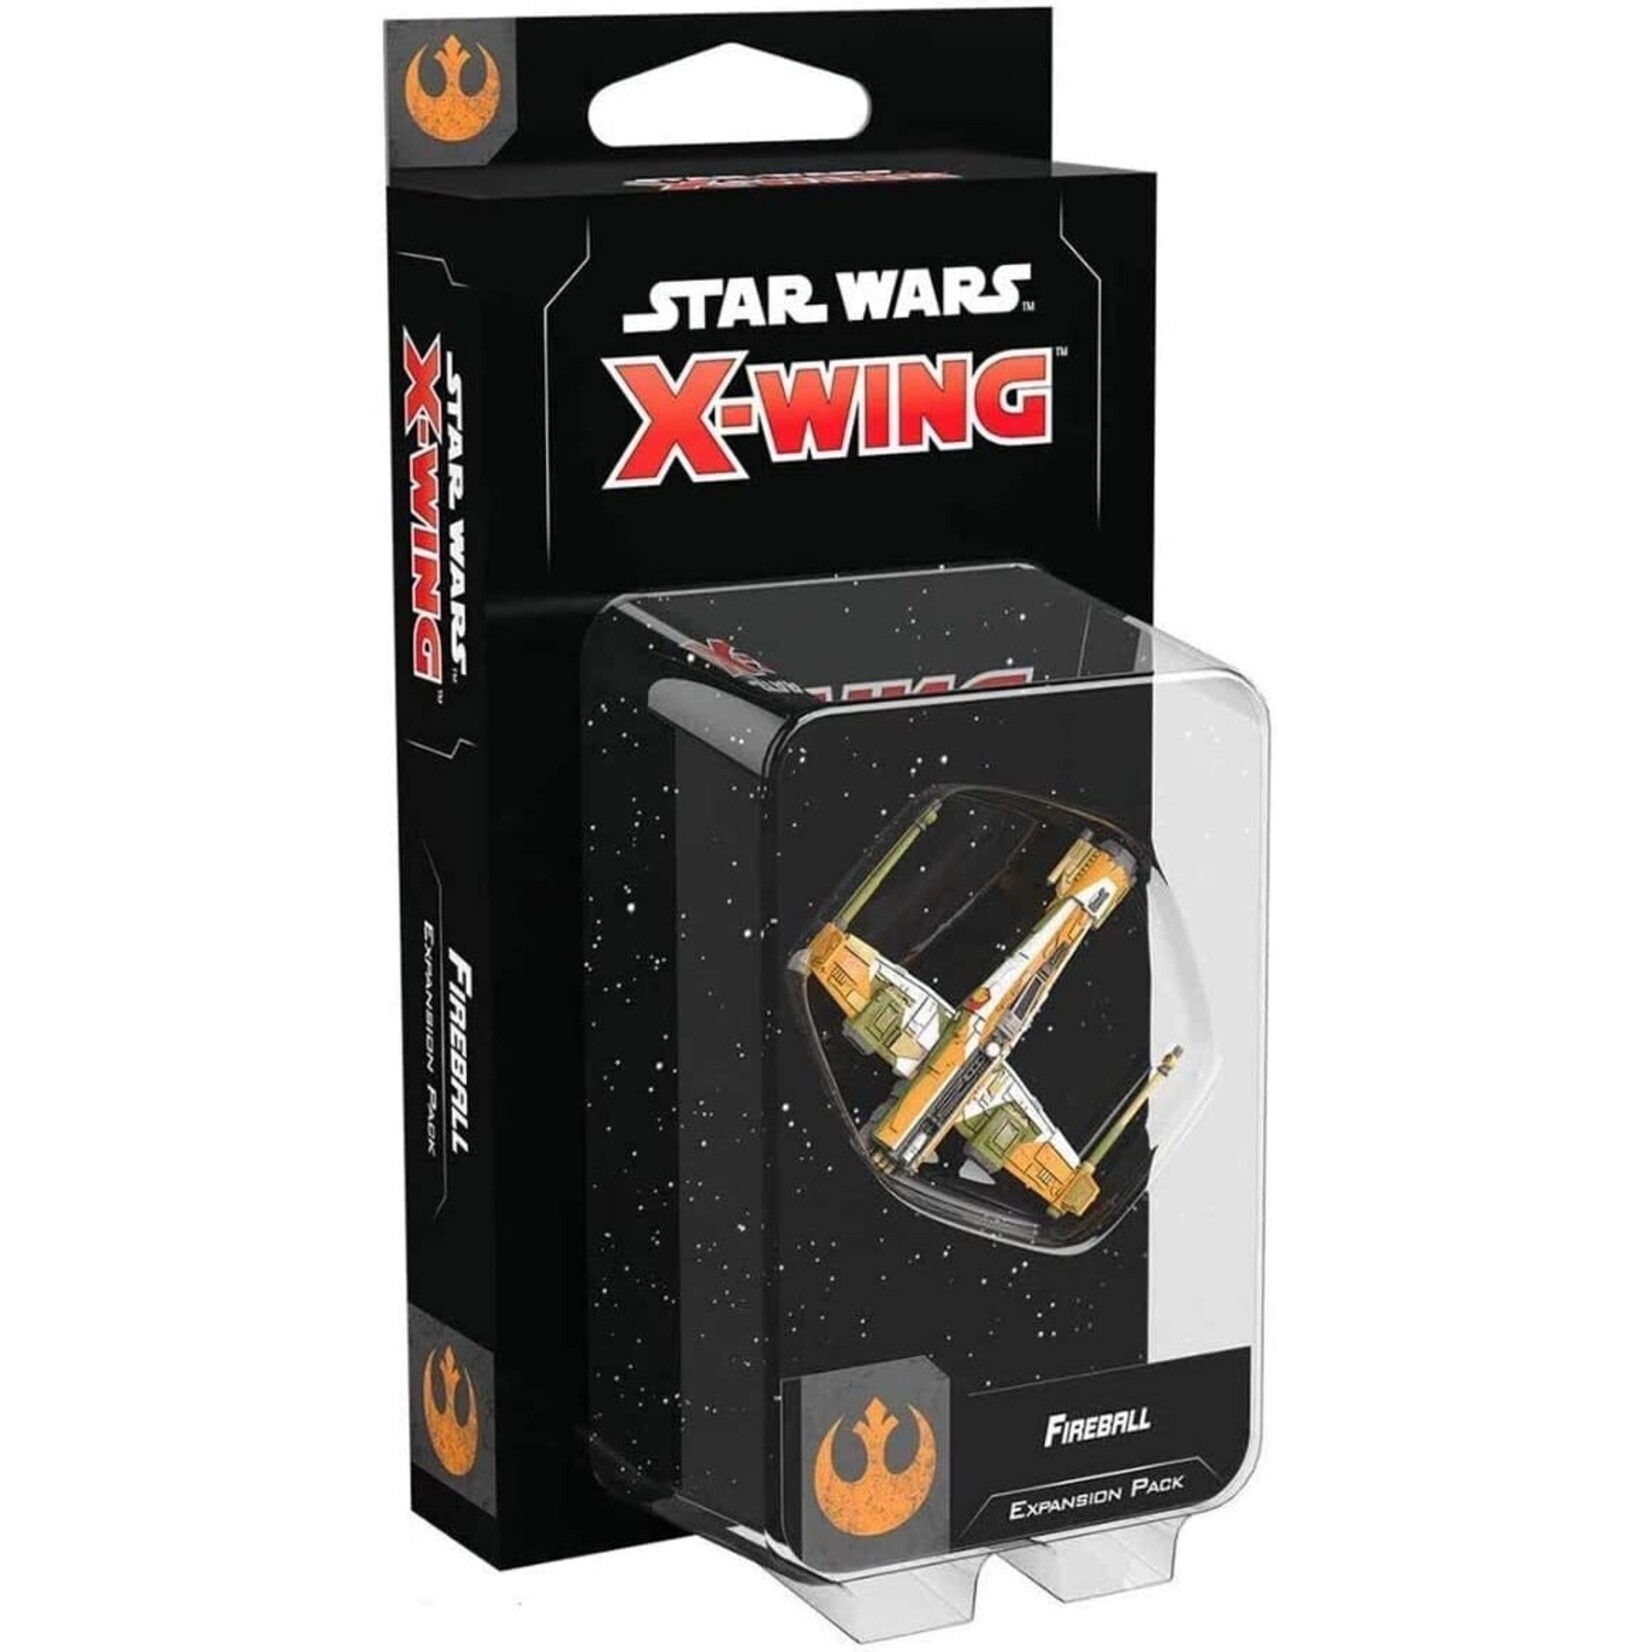 Fantasy Flight Games Star Wars X-Wing: 2nd Edition - Fireball Expansion Pack